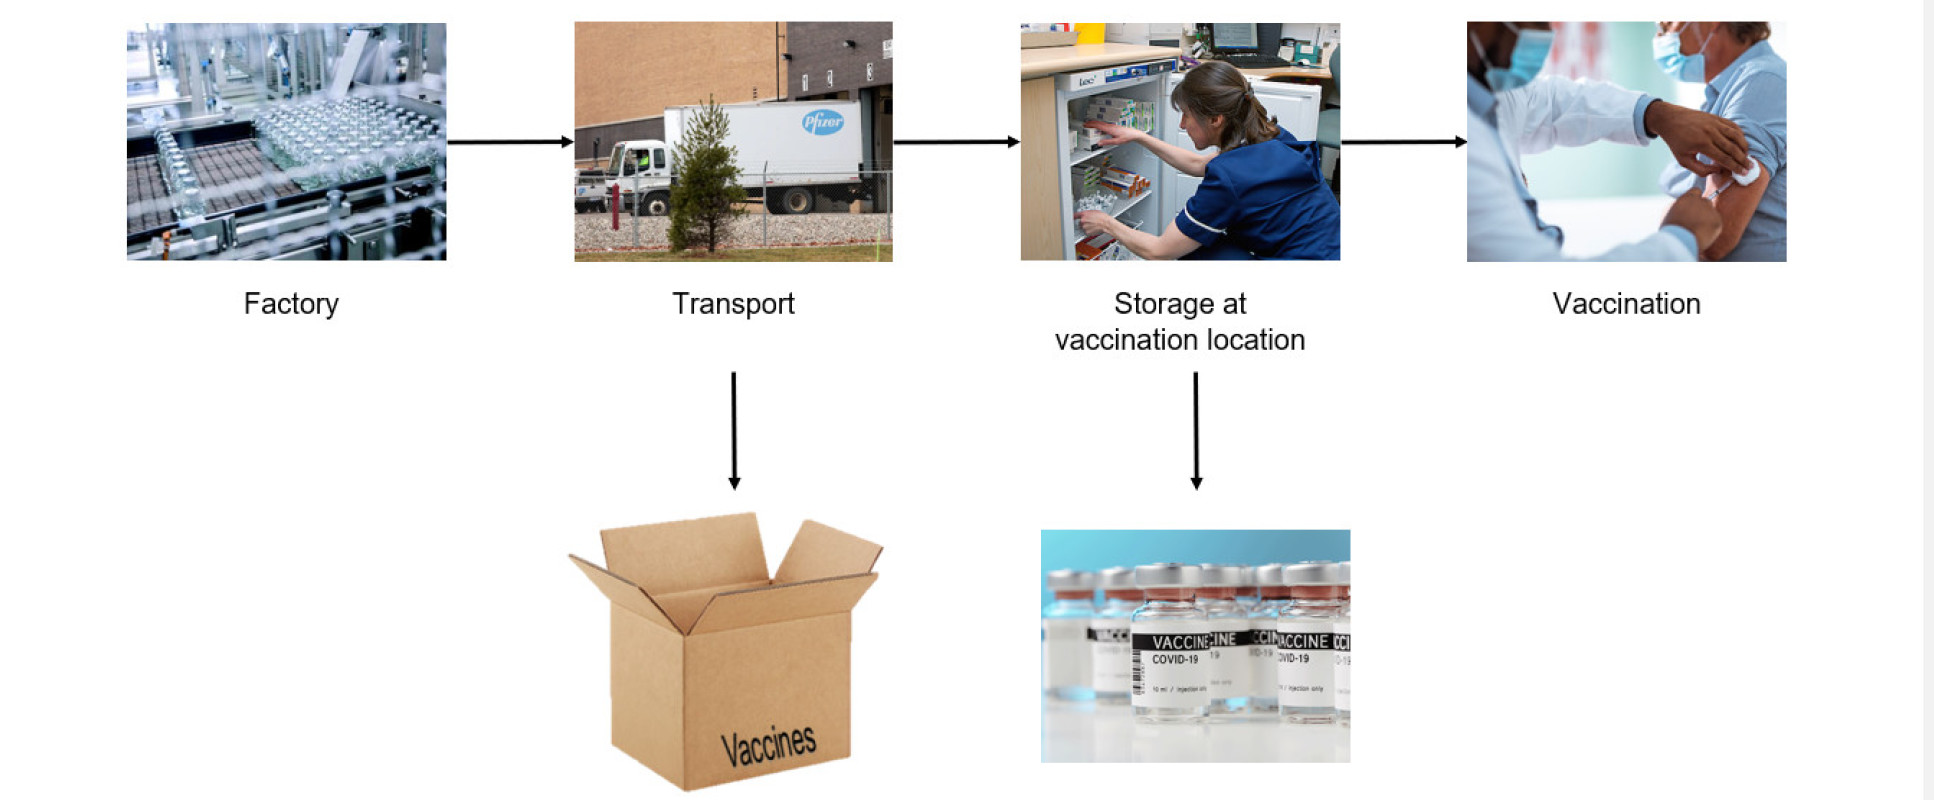 Overview of the solution - images show the different stages of the vaccine transportation and storage process: in boxes the factory and freight vehicles, and then in vials when the vaccines are stored on location and at the point of vaccination